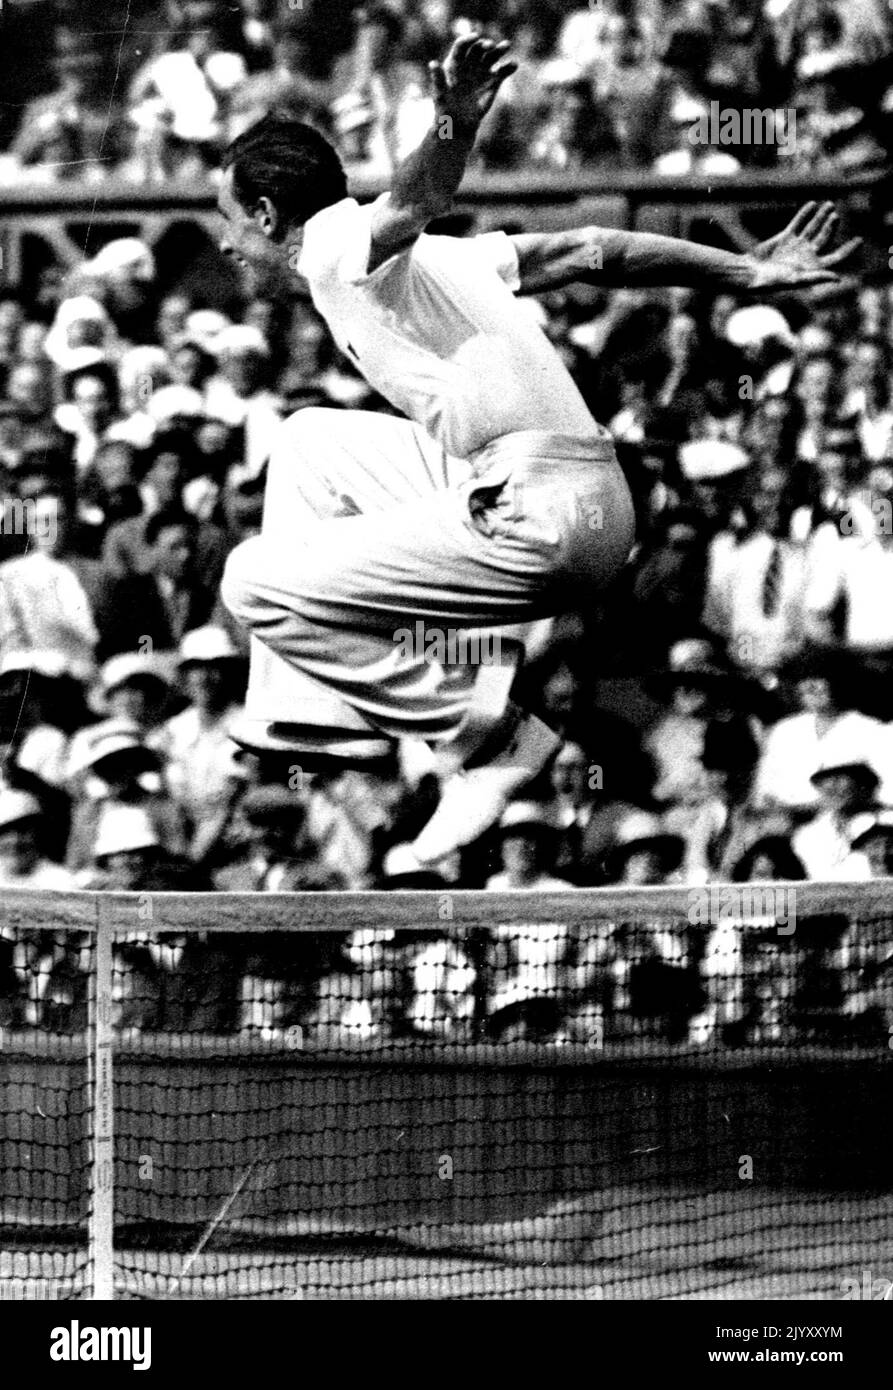 Perry's Victorious Leap! F.J. Perry delightedly jumps the net to shake hands with his opponent S.B. Wood after their match. Gt. Britain and Australian to meet in the finals at Wimbledon. Fred Perry by defeating S.B. Wood (U.S.A.) July 4th., in the semi-finals of the men's singles championships at the Wimbledon tennis, now meets Jack Crawford (Australia) in the finals. August 06, 1934. Stock Photo